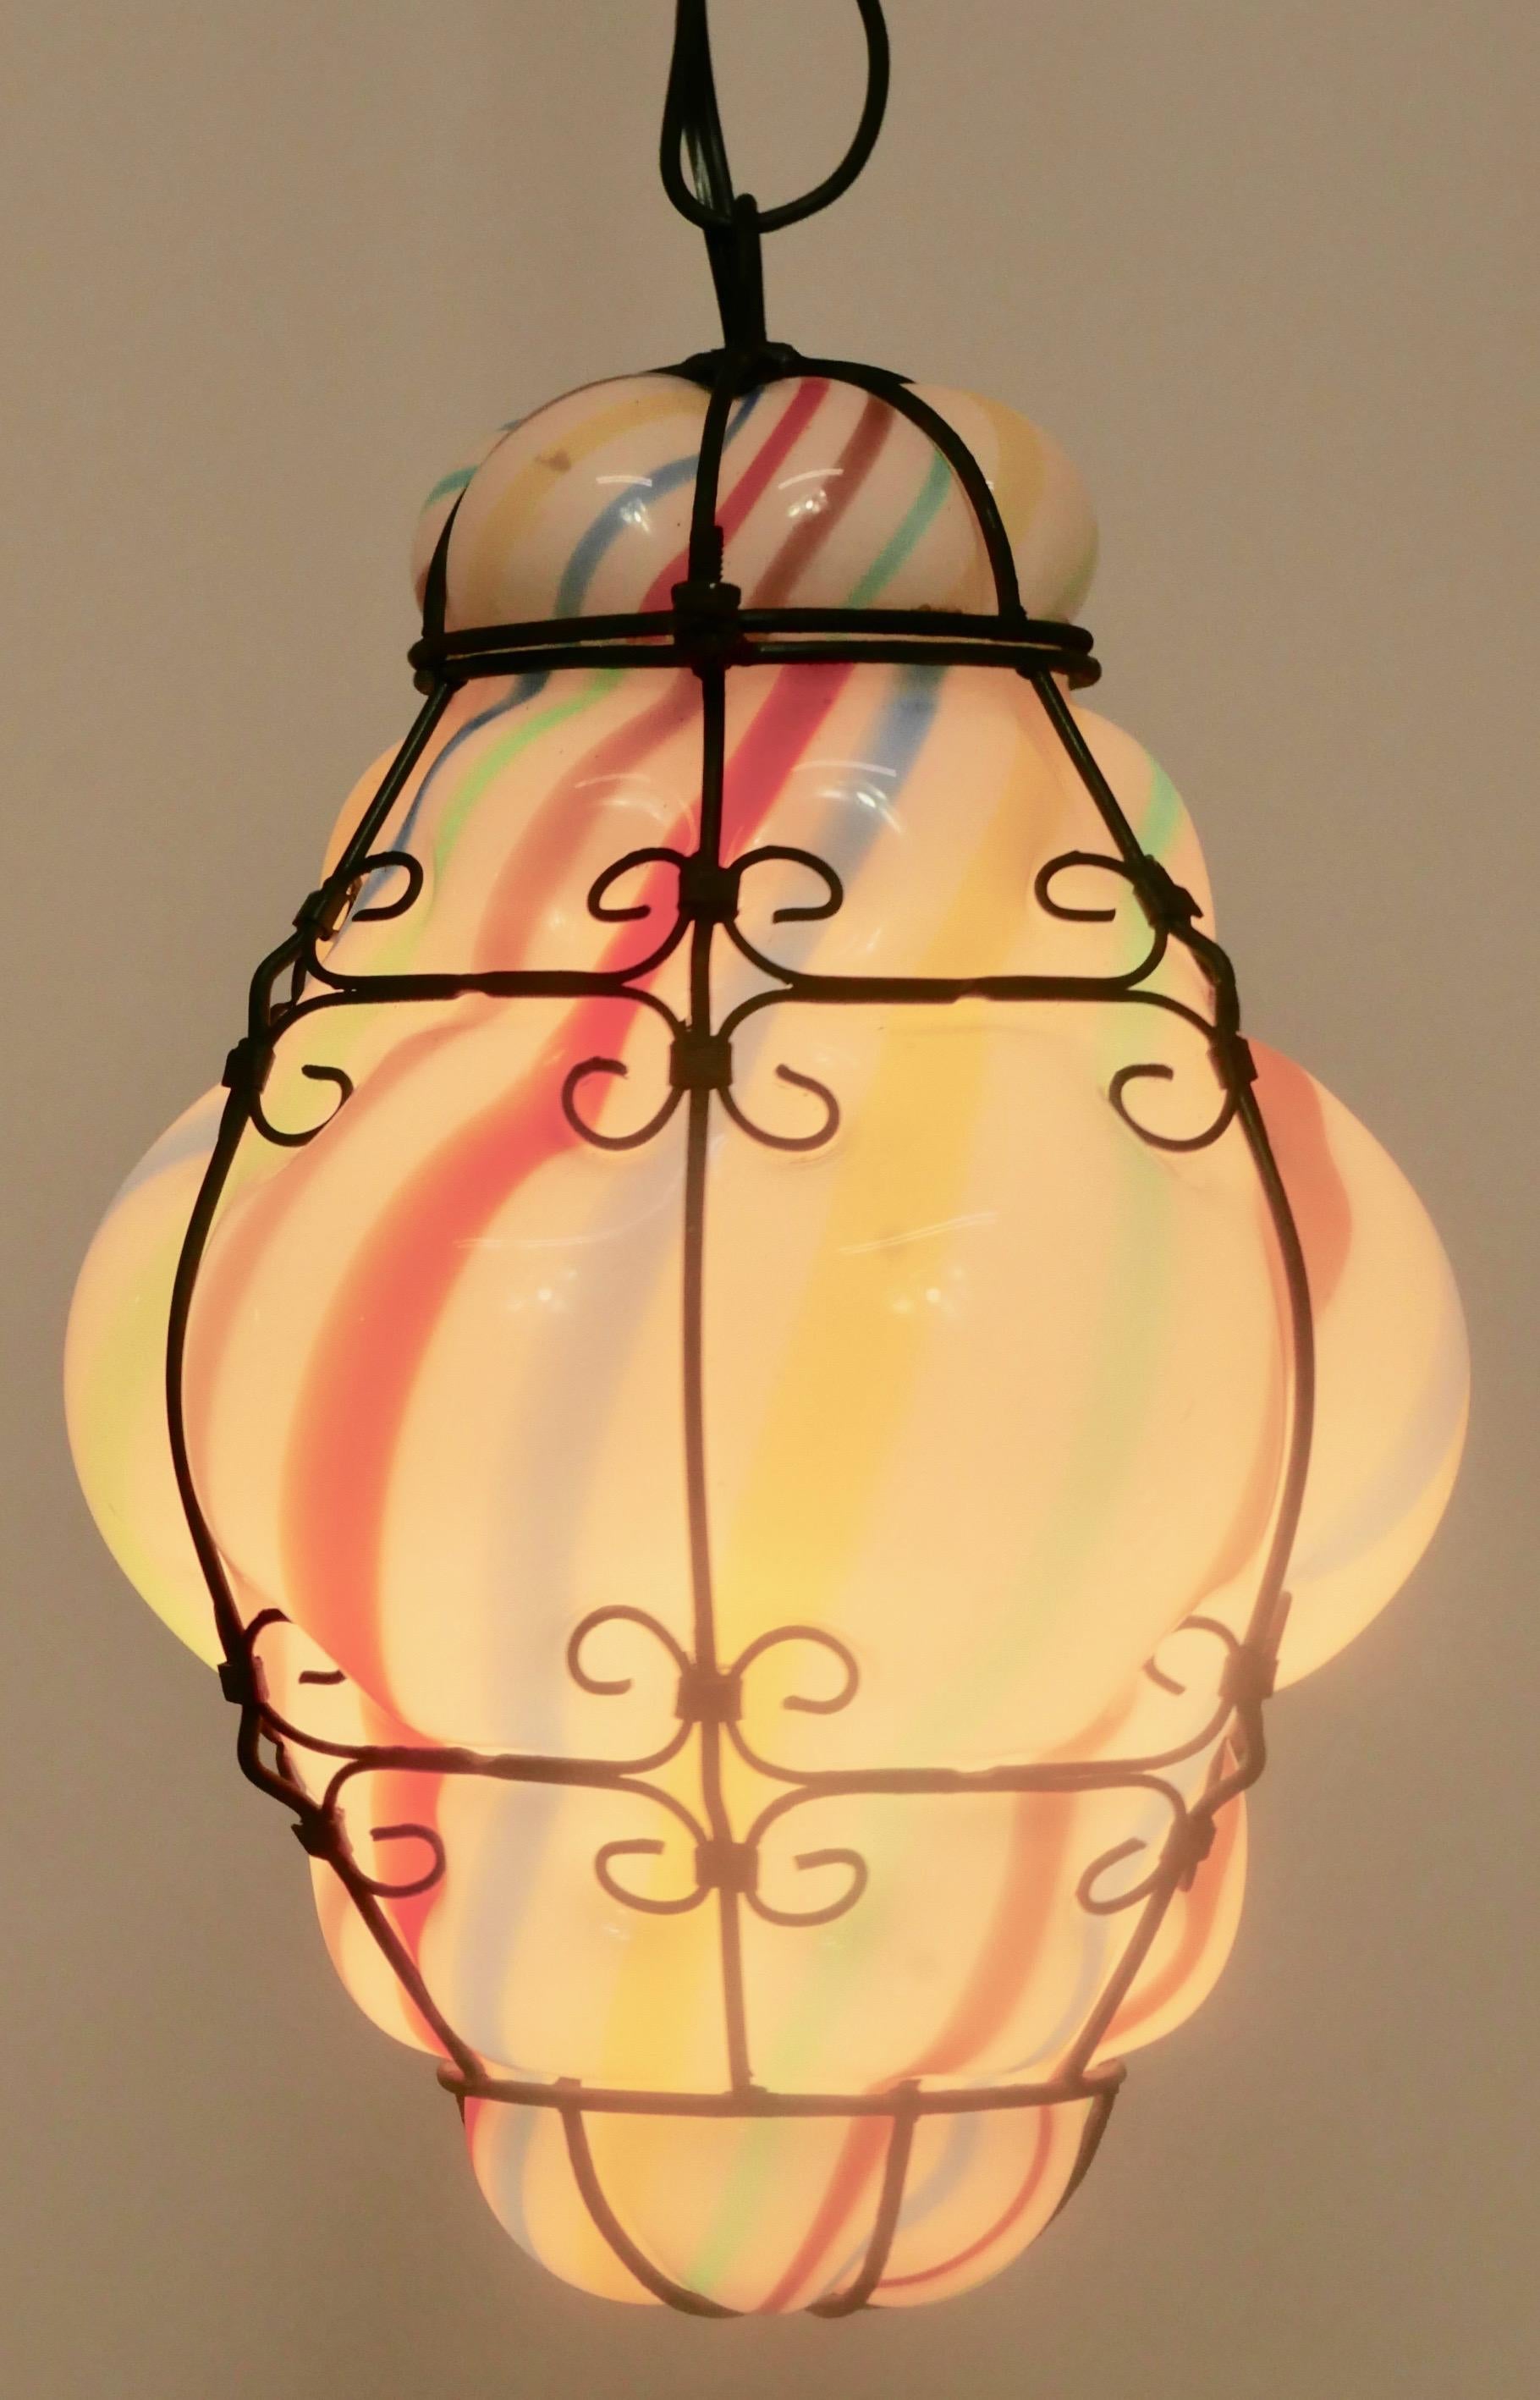 Colorful hand blown and shaped Murano striped glass in a metal cage hanging pendant. Hanging metal chain can be adjusted.
Venice, Italy
Early 20th century.